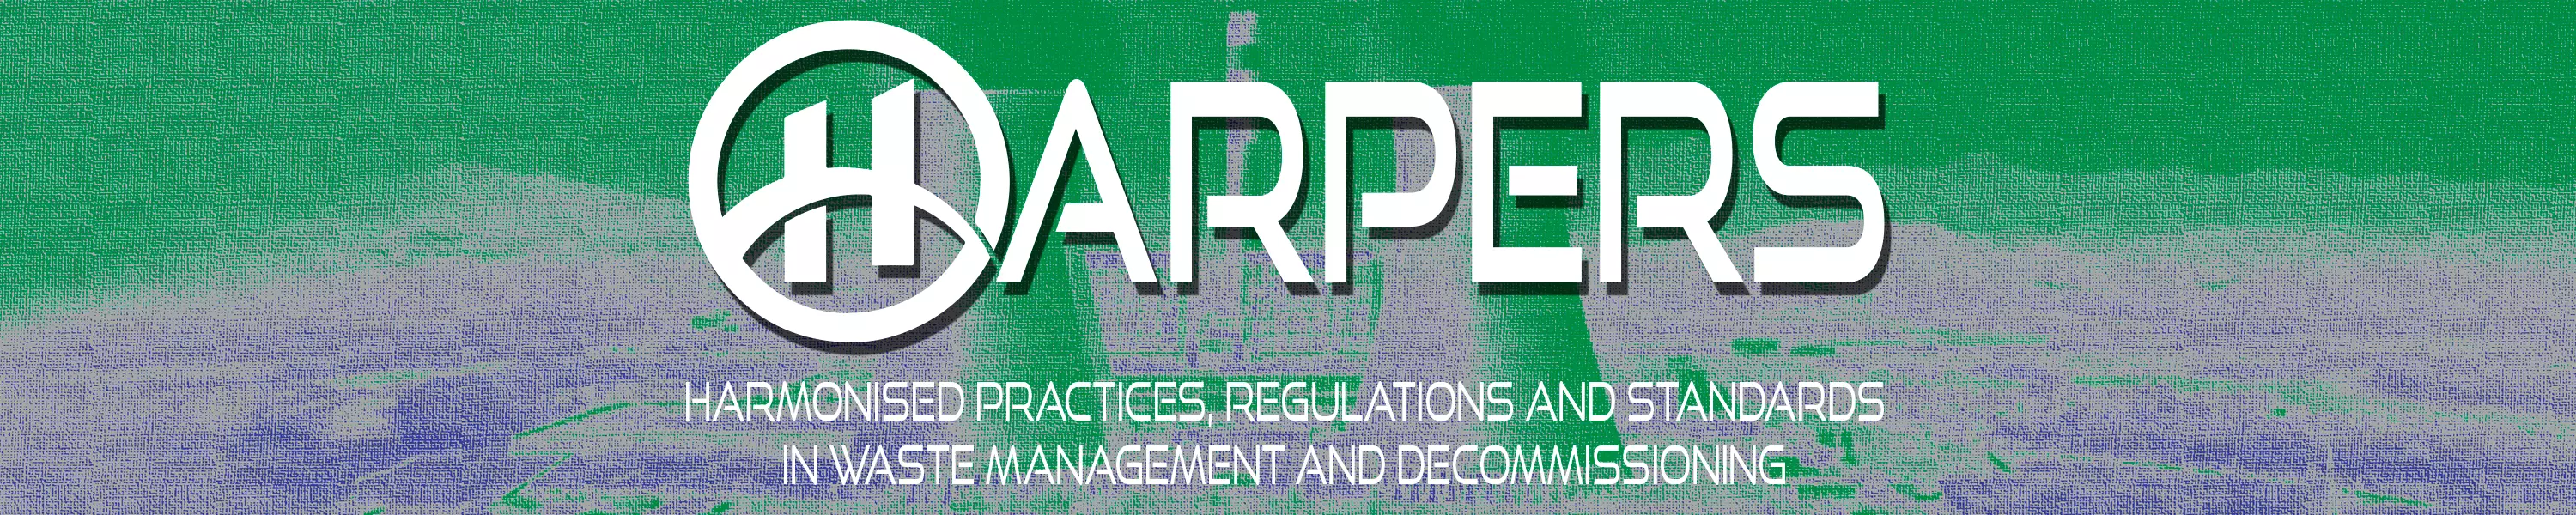 HARPERS - HARmonised PracticEs, Regulations and Standards in waste management and decommissioning